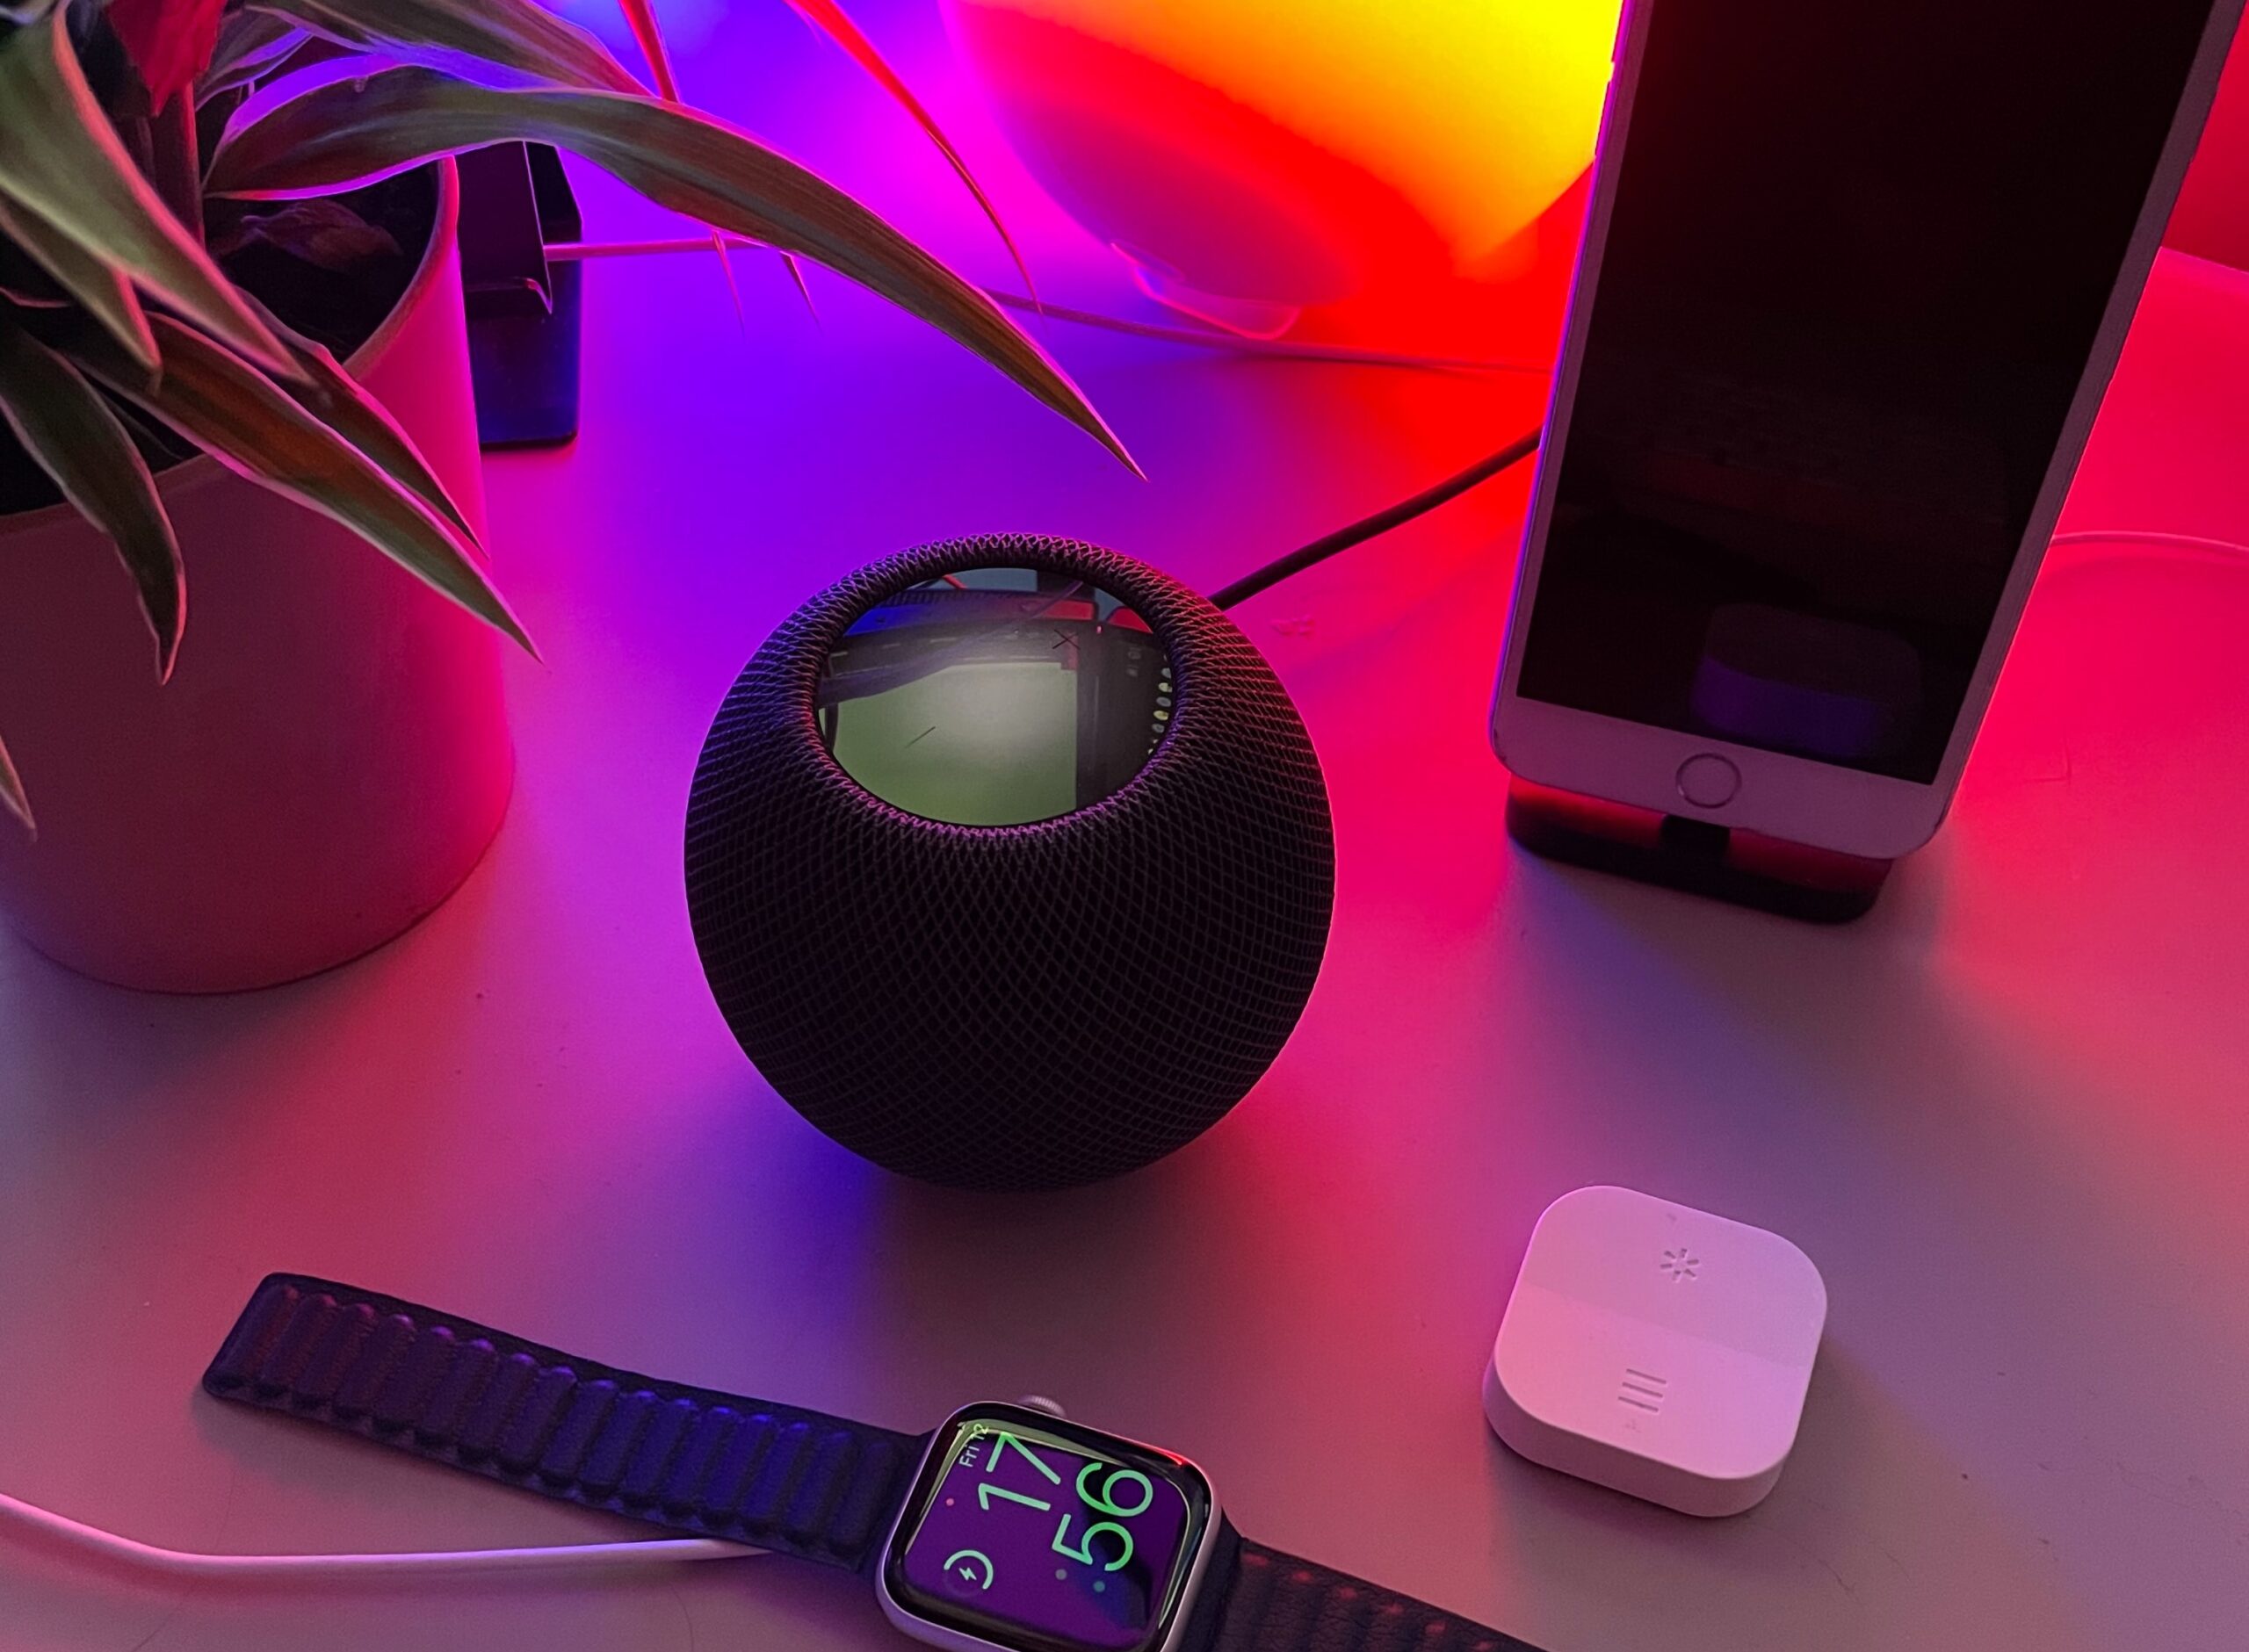 If you’ve been using the new HomePod Mini regularly, you may have noticed that your iPhone starts vibrating when it’s nearby and also brings up a 